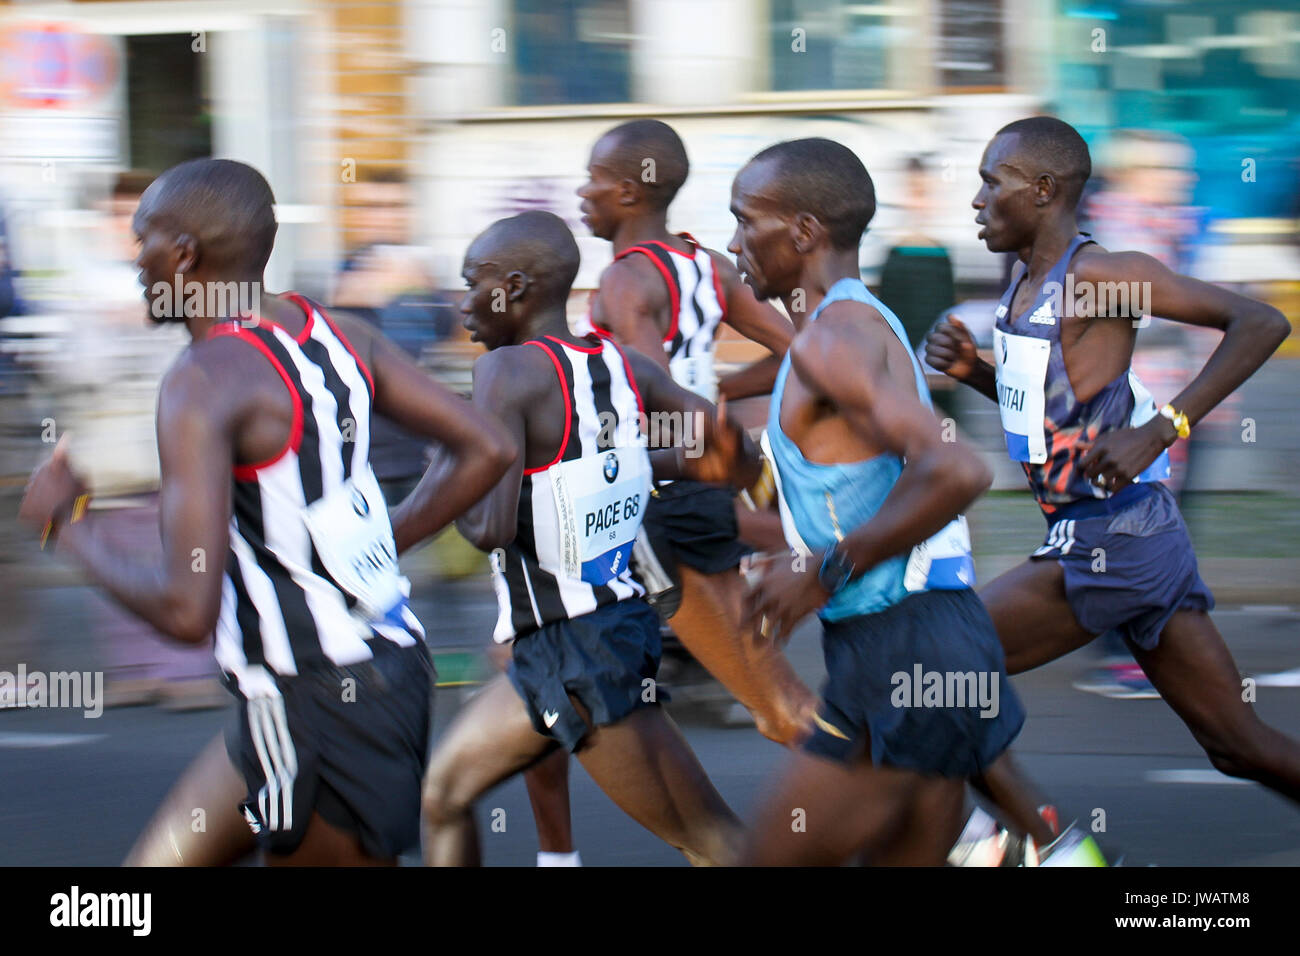 BERLIN, GERMANY – SEPTEMBER 27, 2015: Professional runners during the 2015 42nd edition of the Berlin Marathon, including athlete Eliud Kipchoge and r Stock Photo